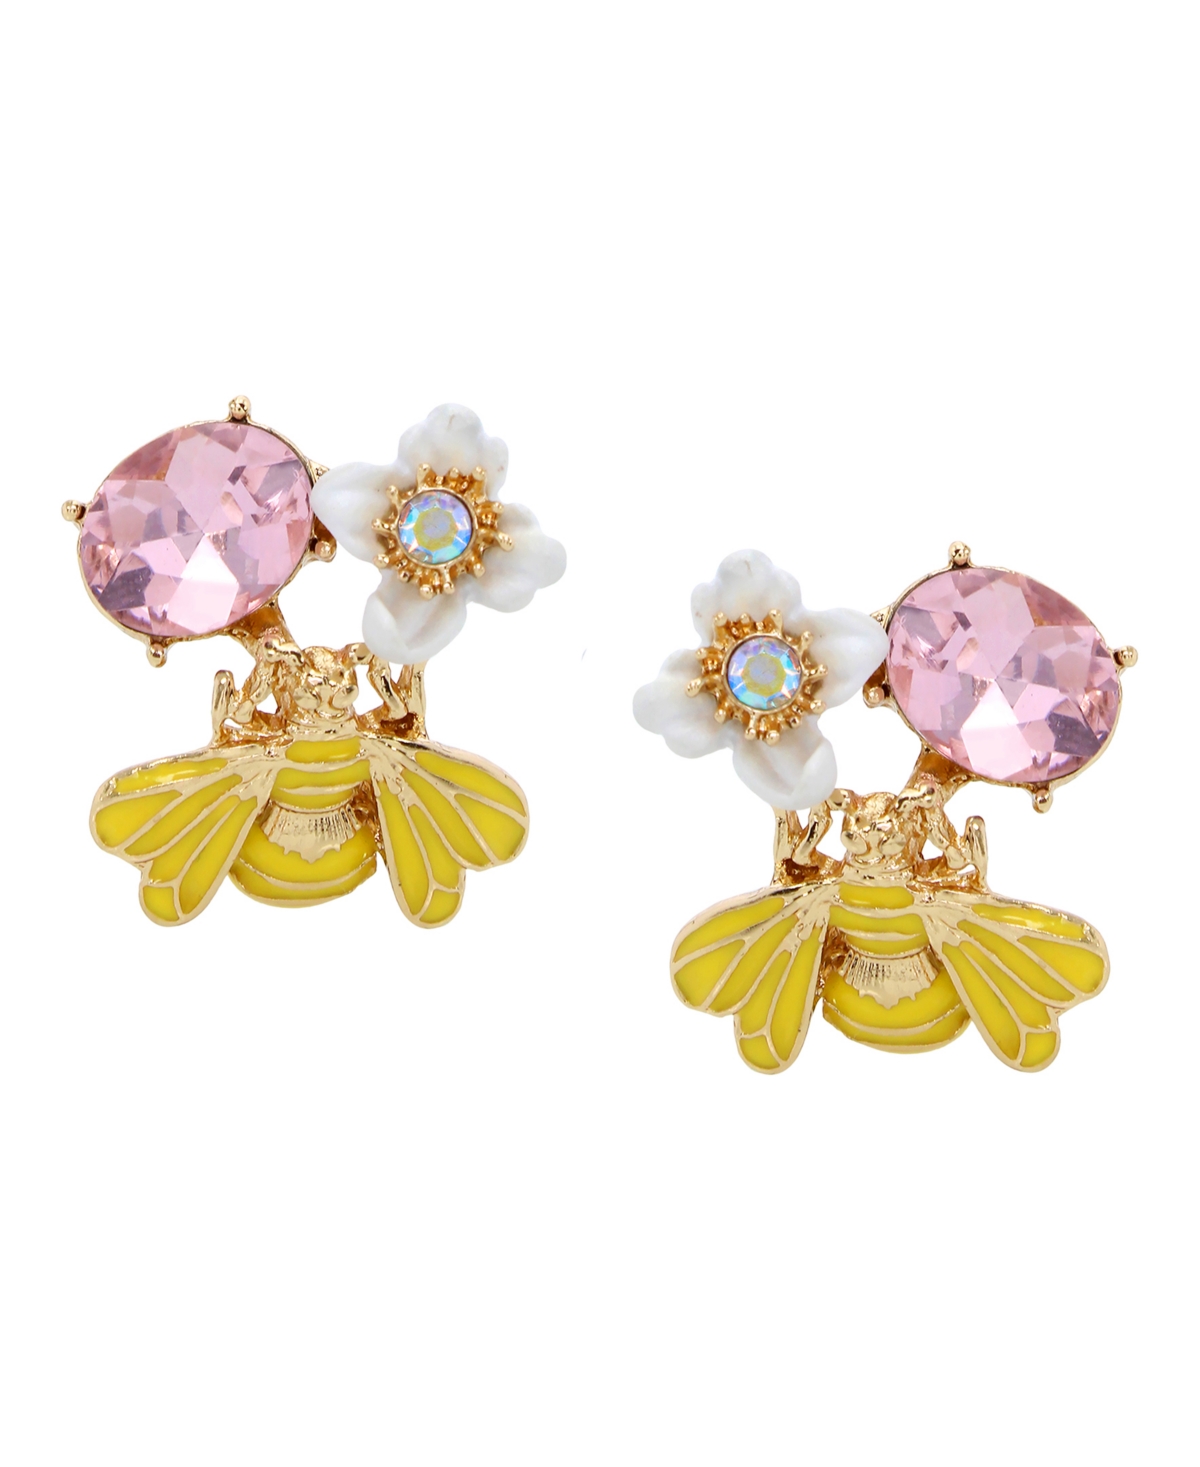 Faux Stone Bug Cluster Button Earrings - Pastel Multi, Gold